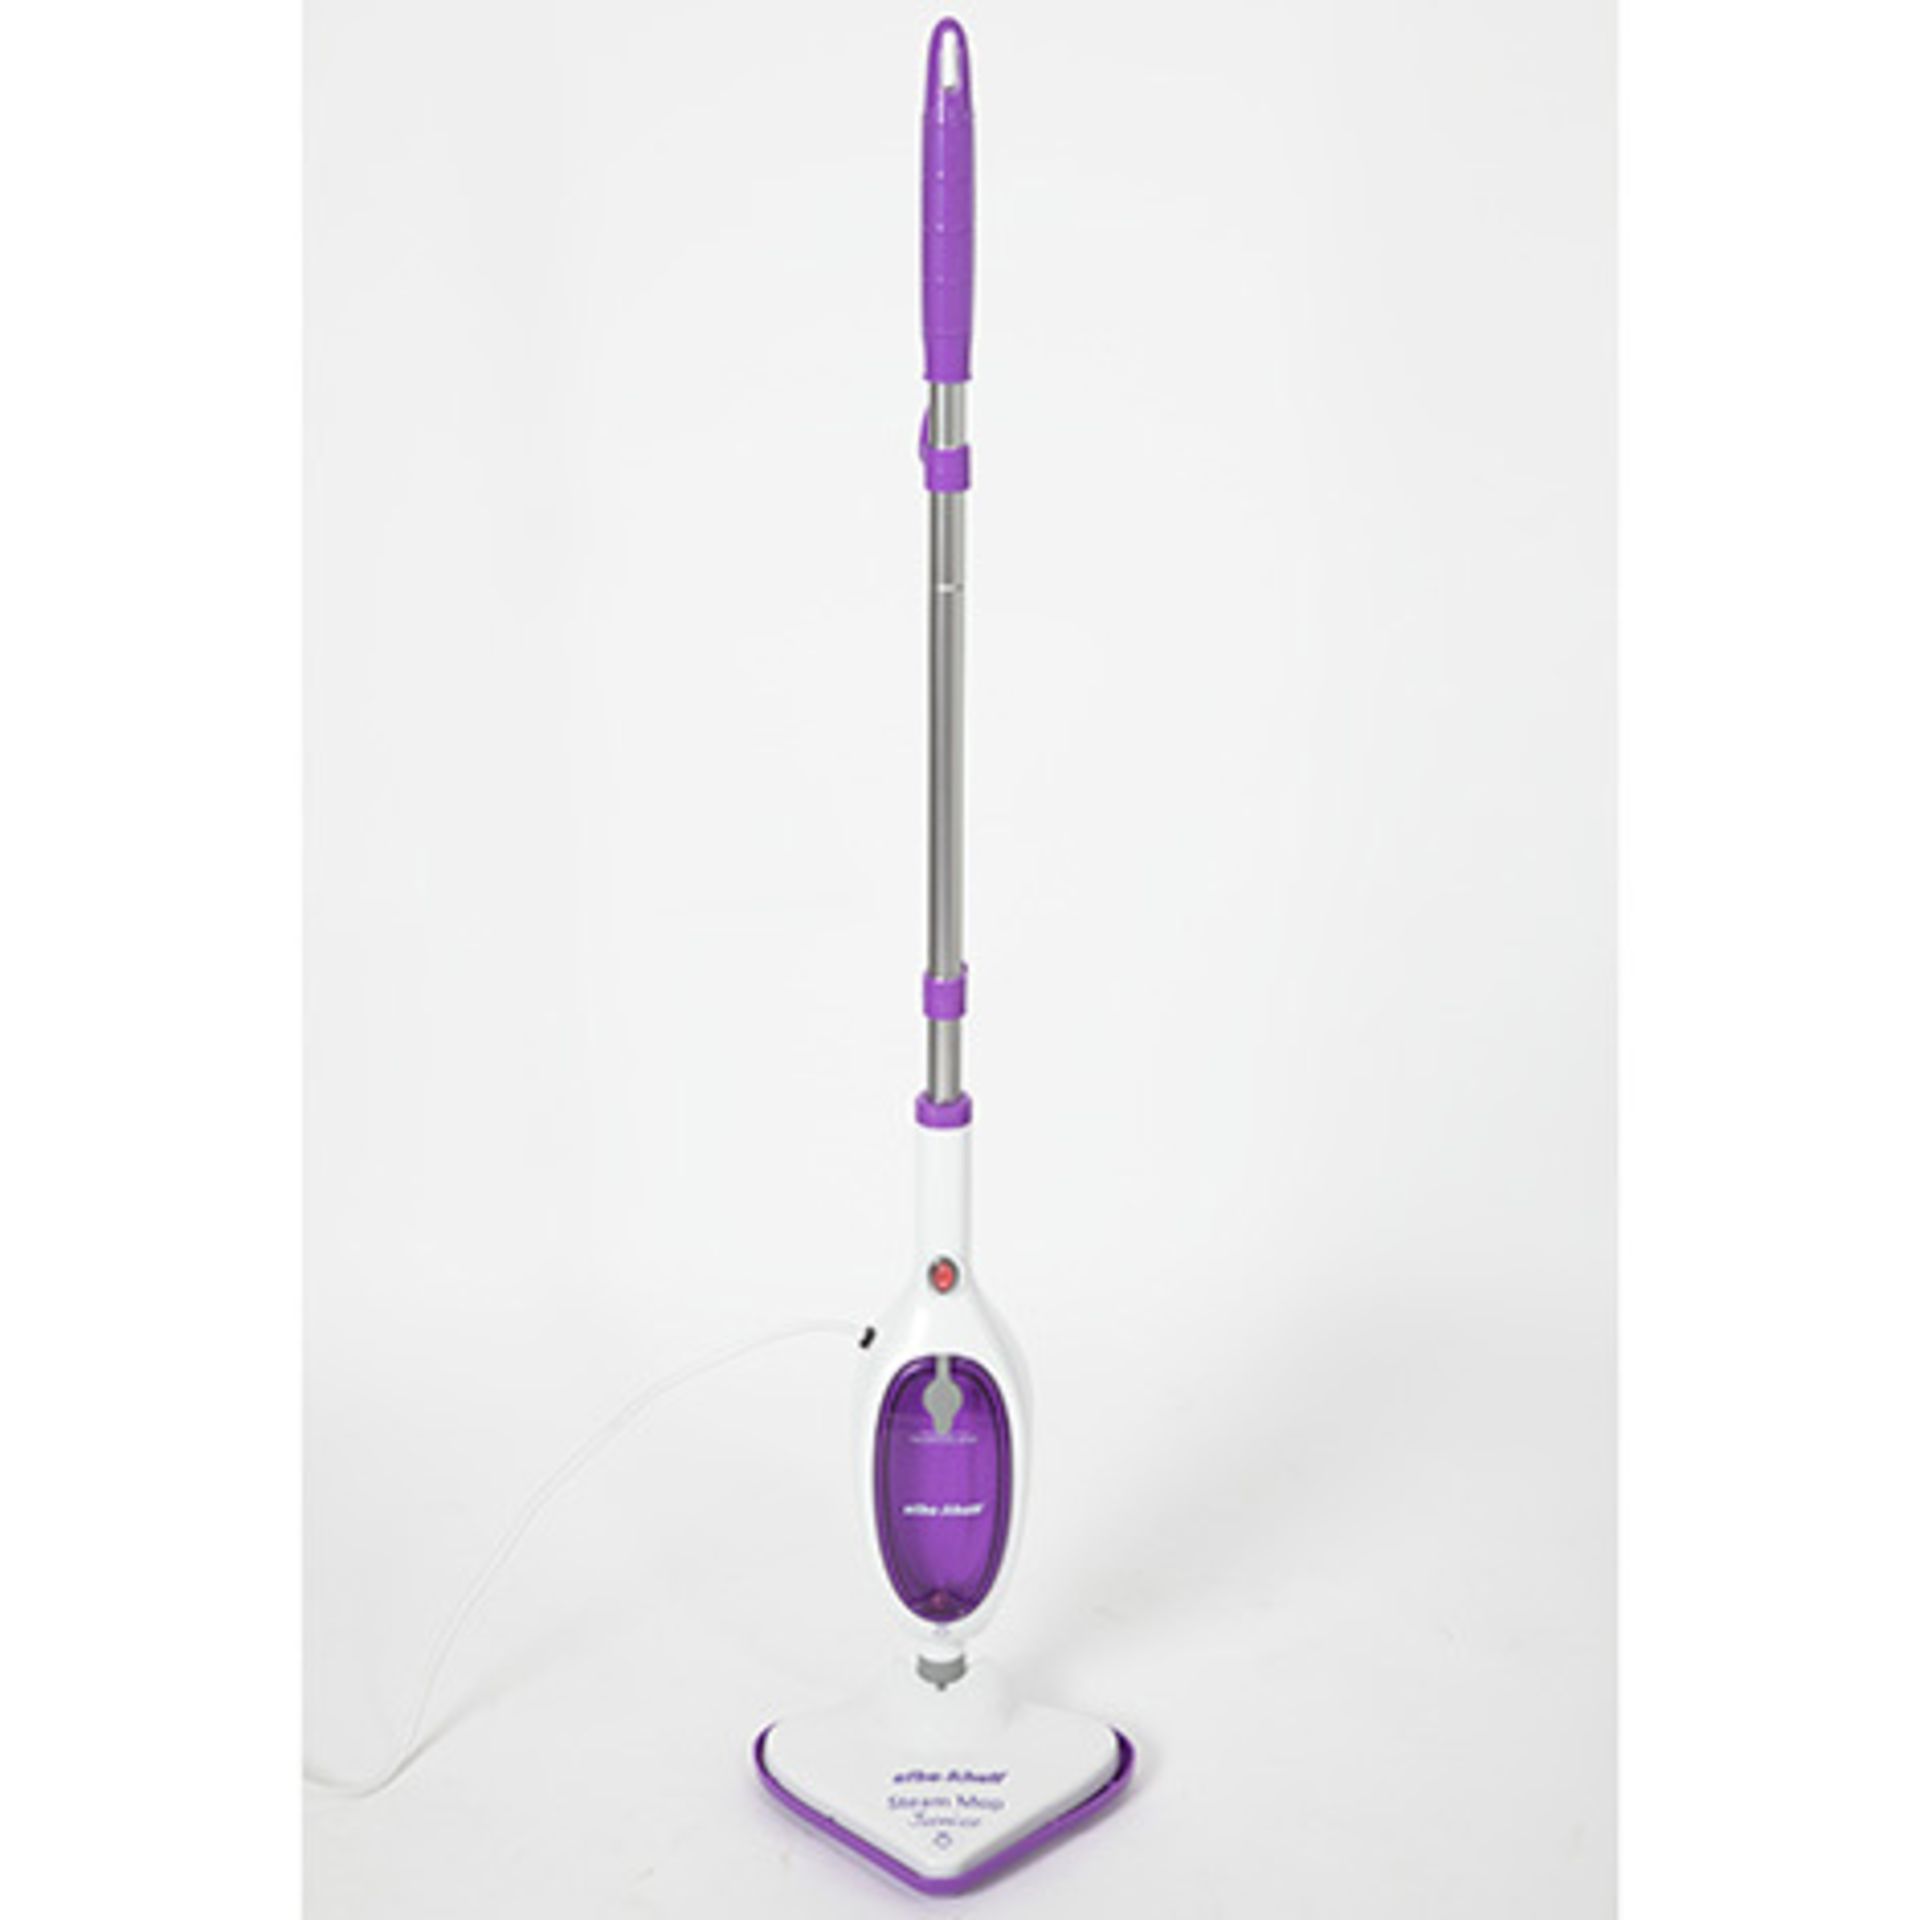 V *TRADE QTY* Brand New Efbe-Schott Steam Mop (New And Boxed) Colours And Model May Vary RRP59.99 - Image 2 of 2